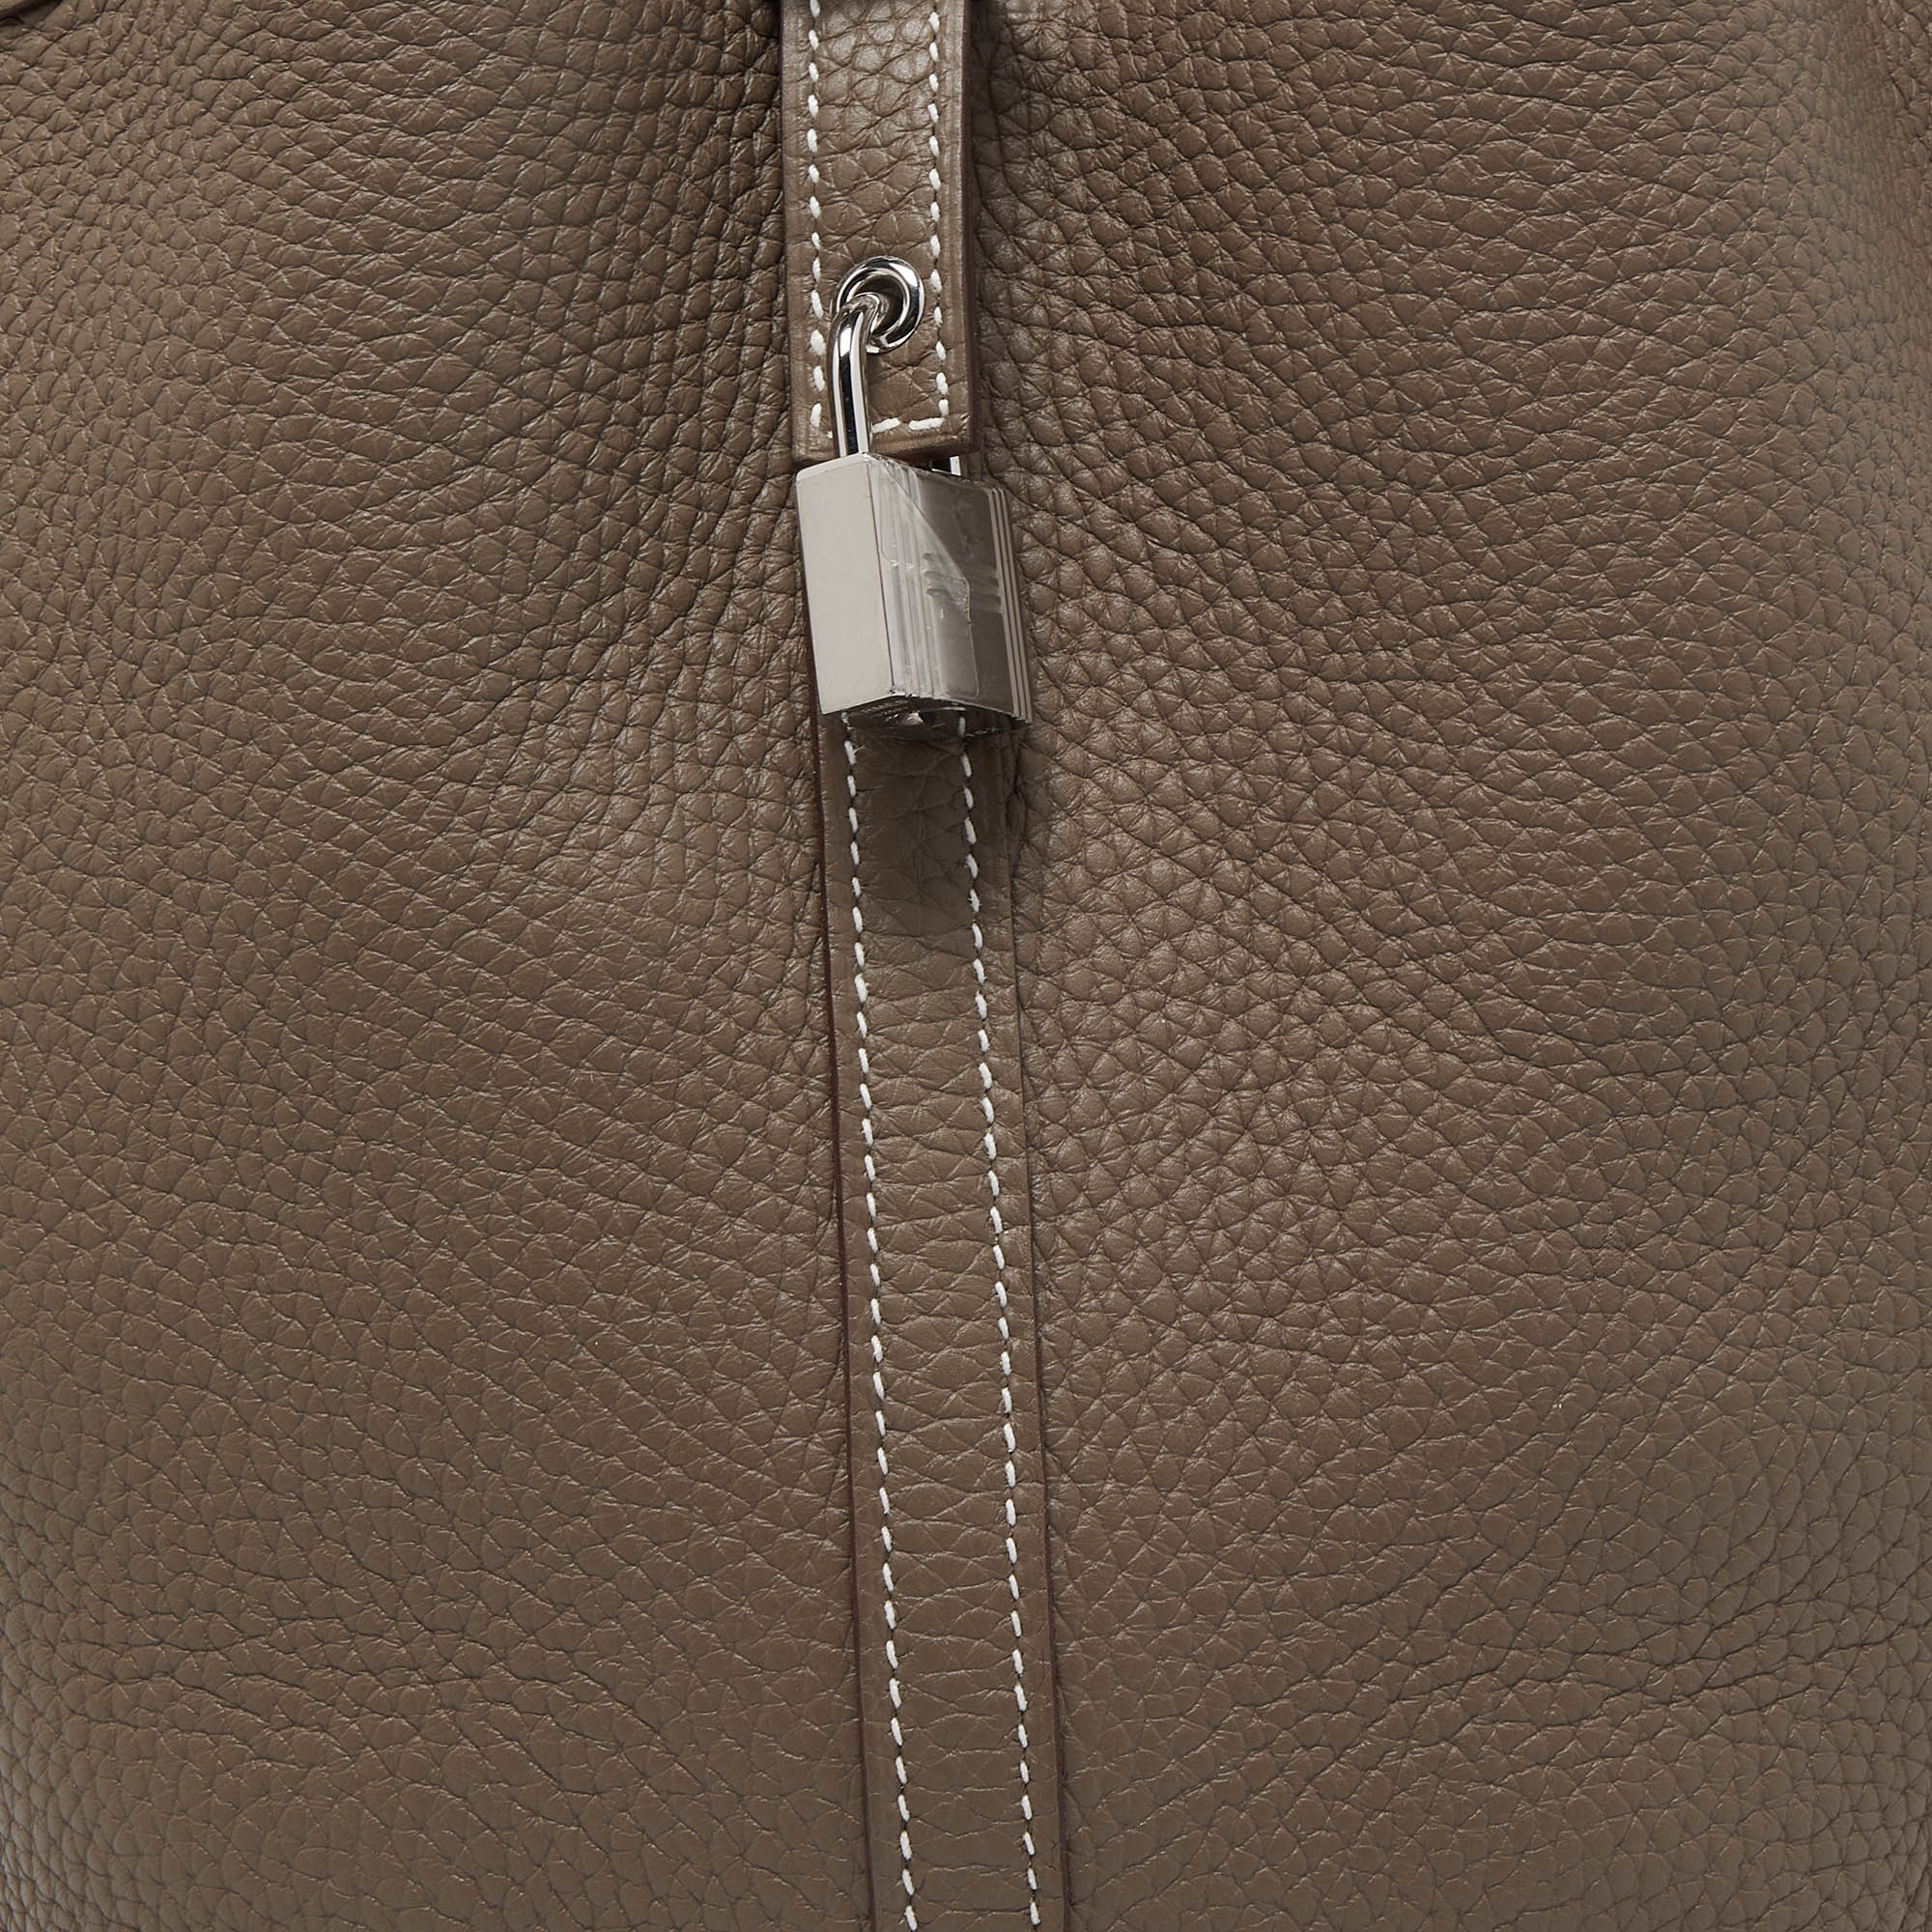 HERMES PICOTIN LOCK TOUCH GM Clemence leather/Swift leather Blue pale/ –  BRANDSHOP-RESHINE